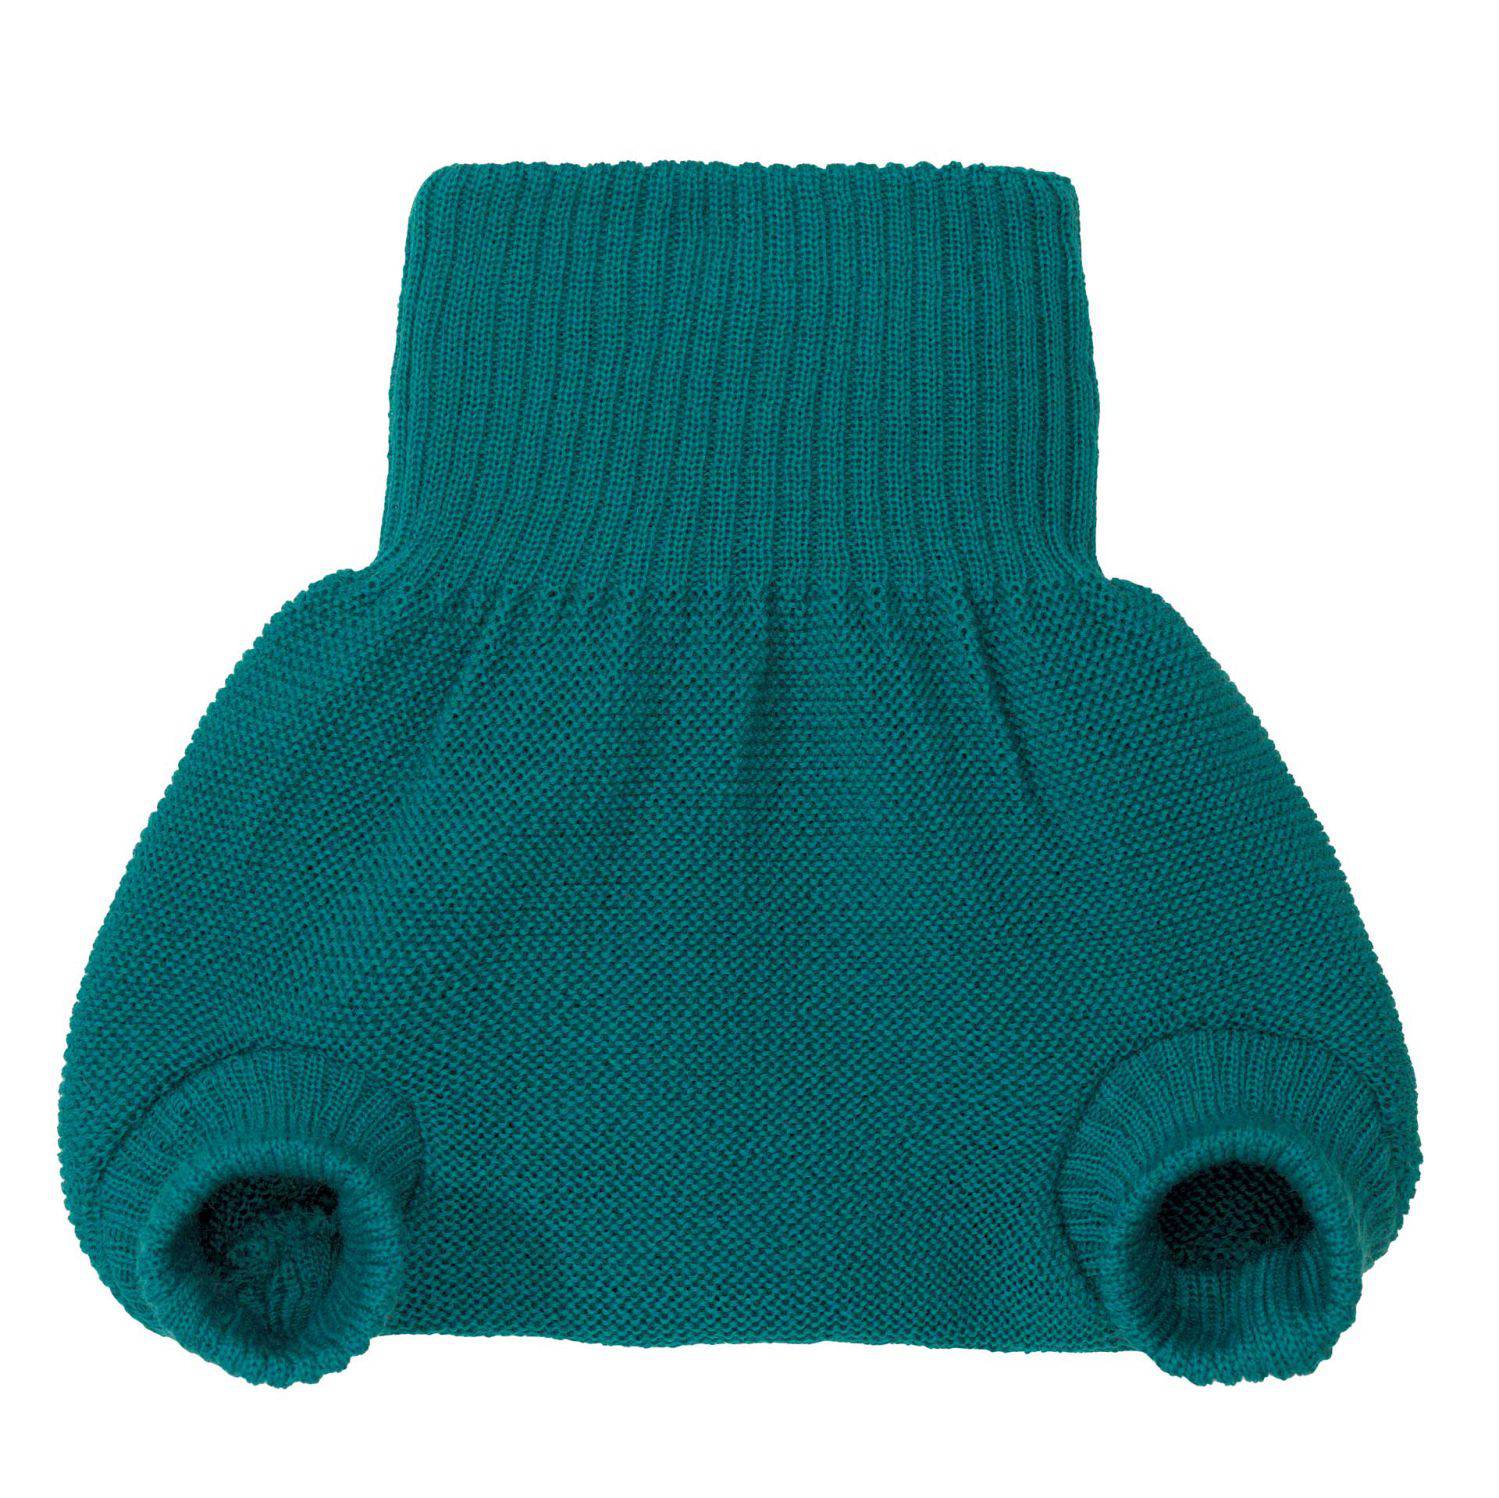 Disana knitted wool cover